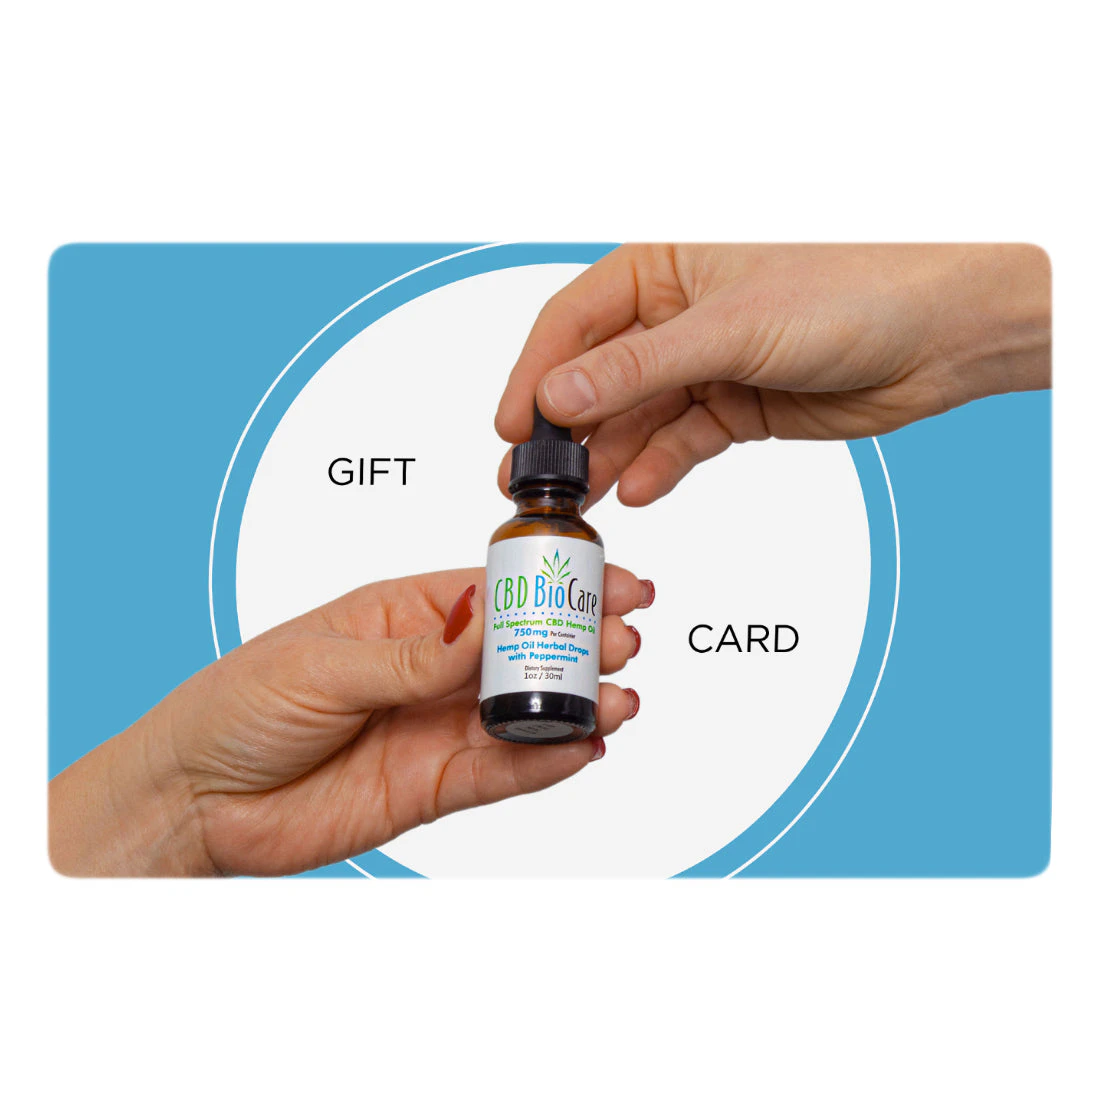 CBD BioCare Gift Card - Give The Gift of Healing & Wellness With CBD 